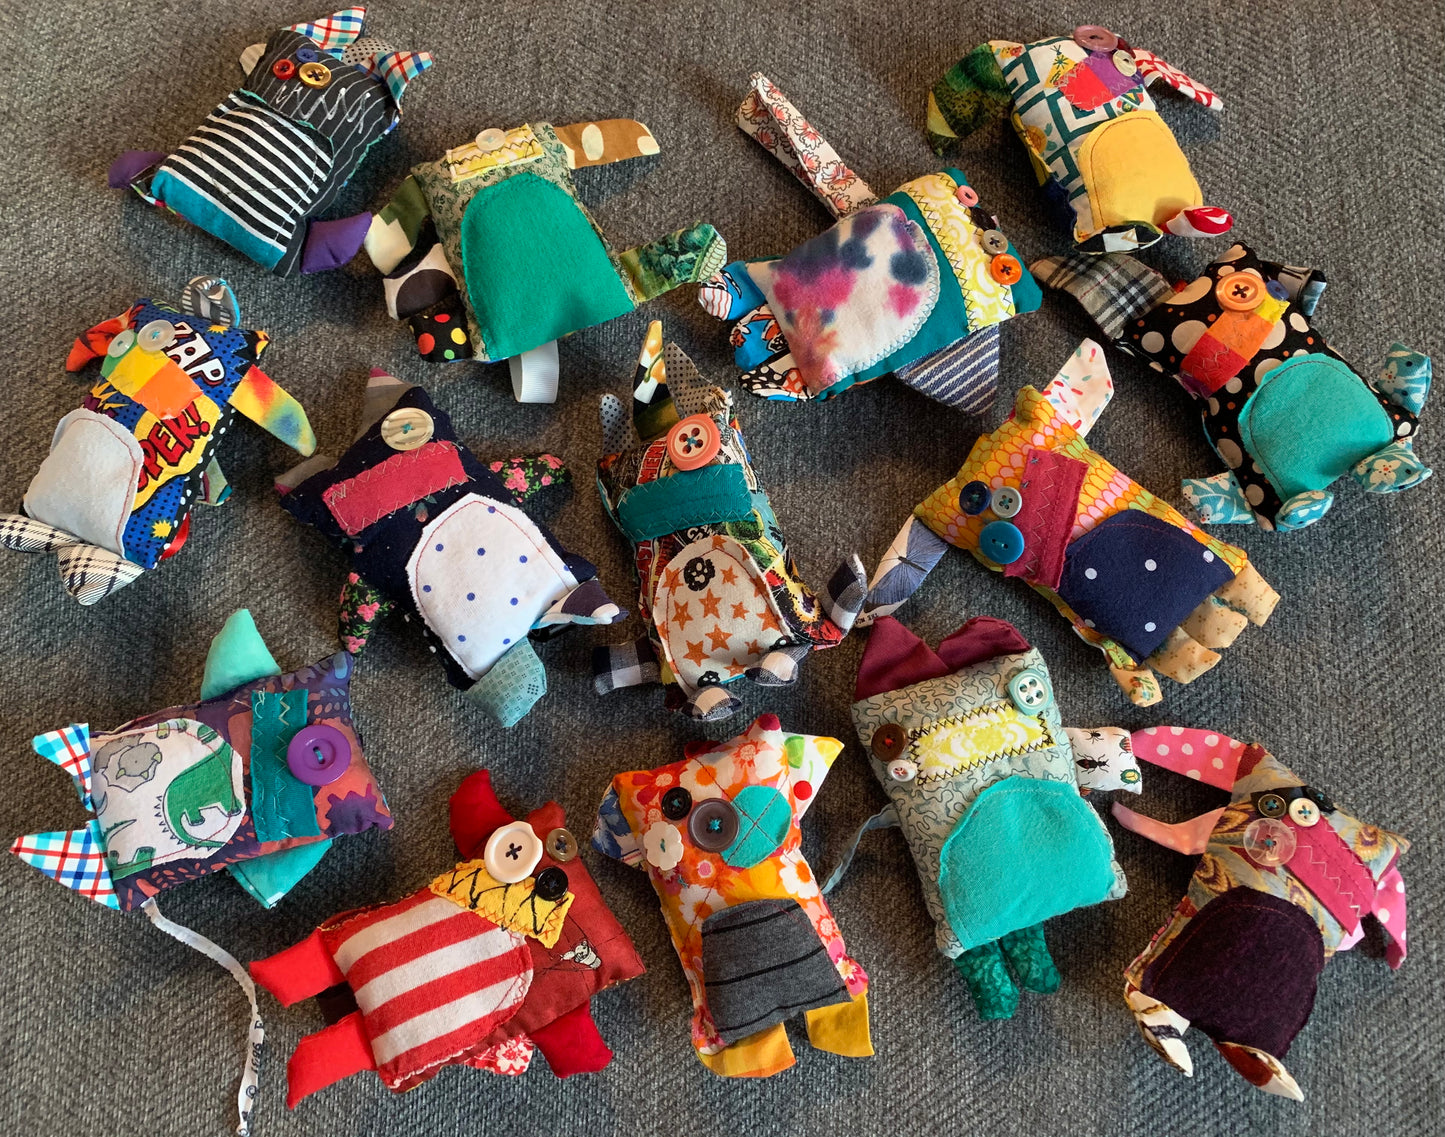 mini monstr keychain ornaments, in a group, aerial view flat lay against a grey background